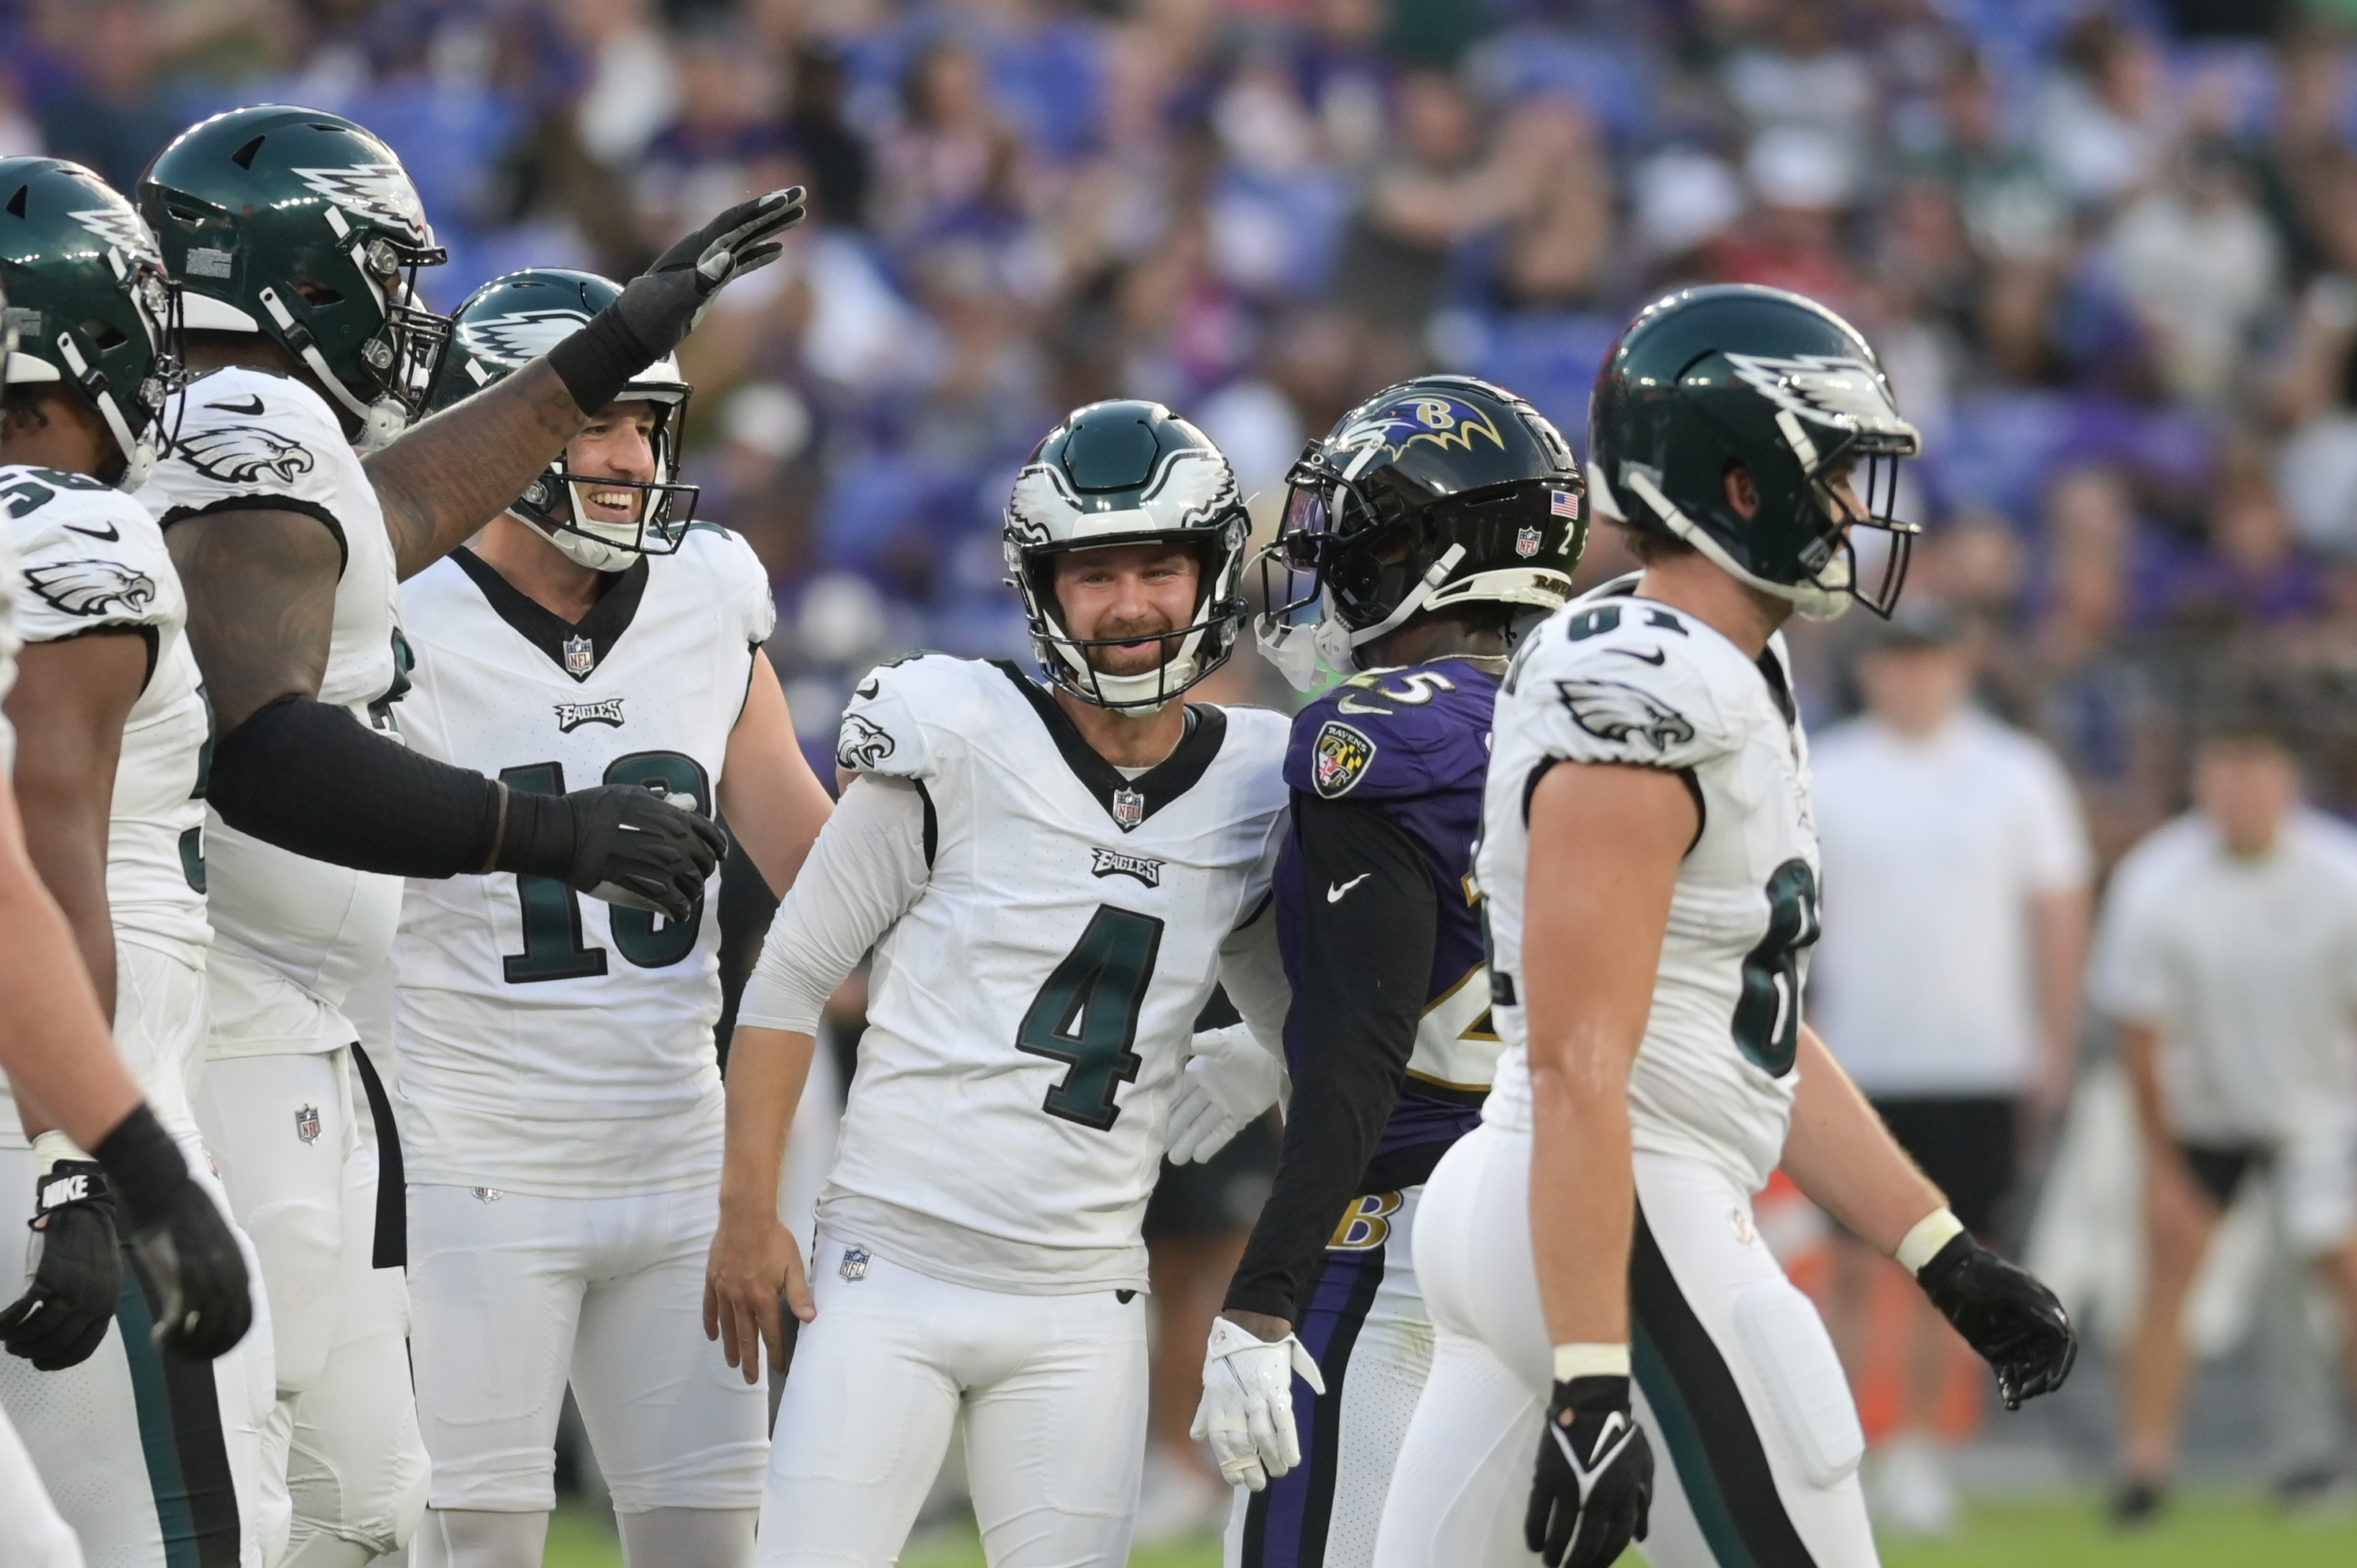 Three Positions to Watch for in Eagles Preseason Game One